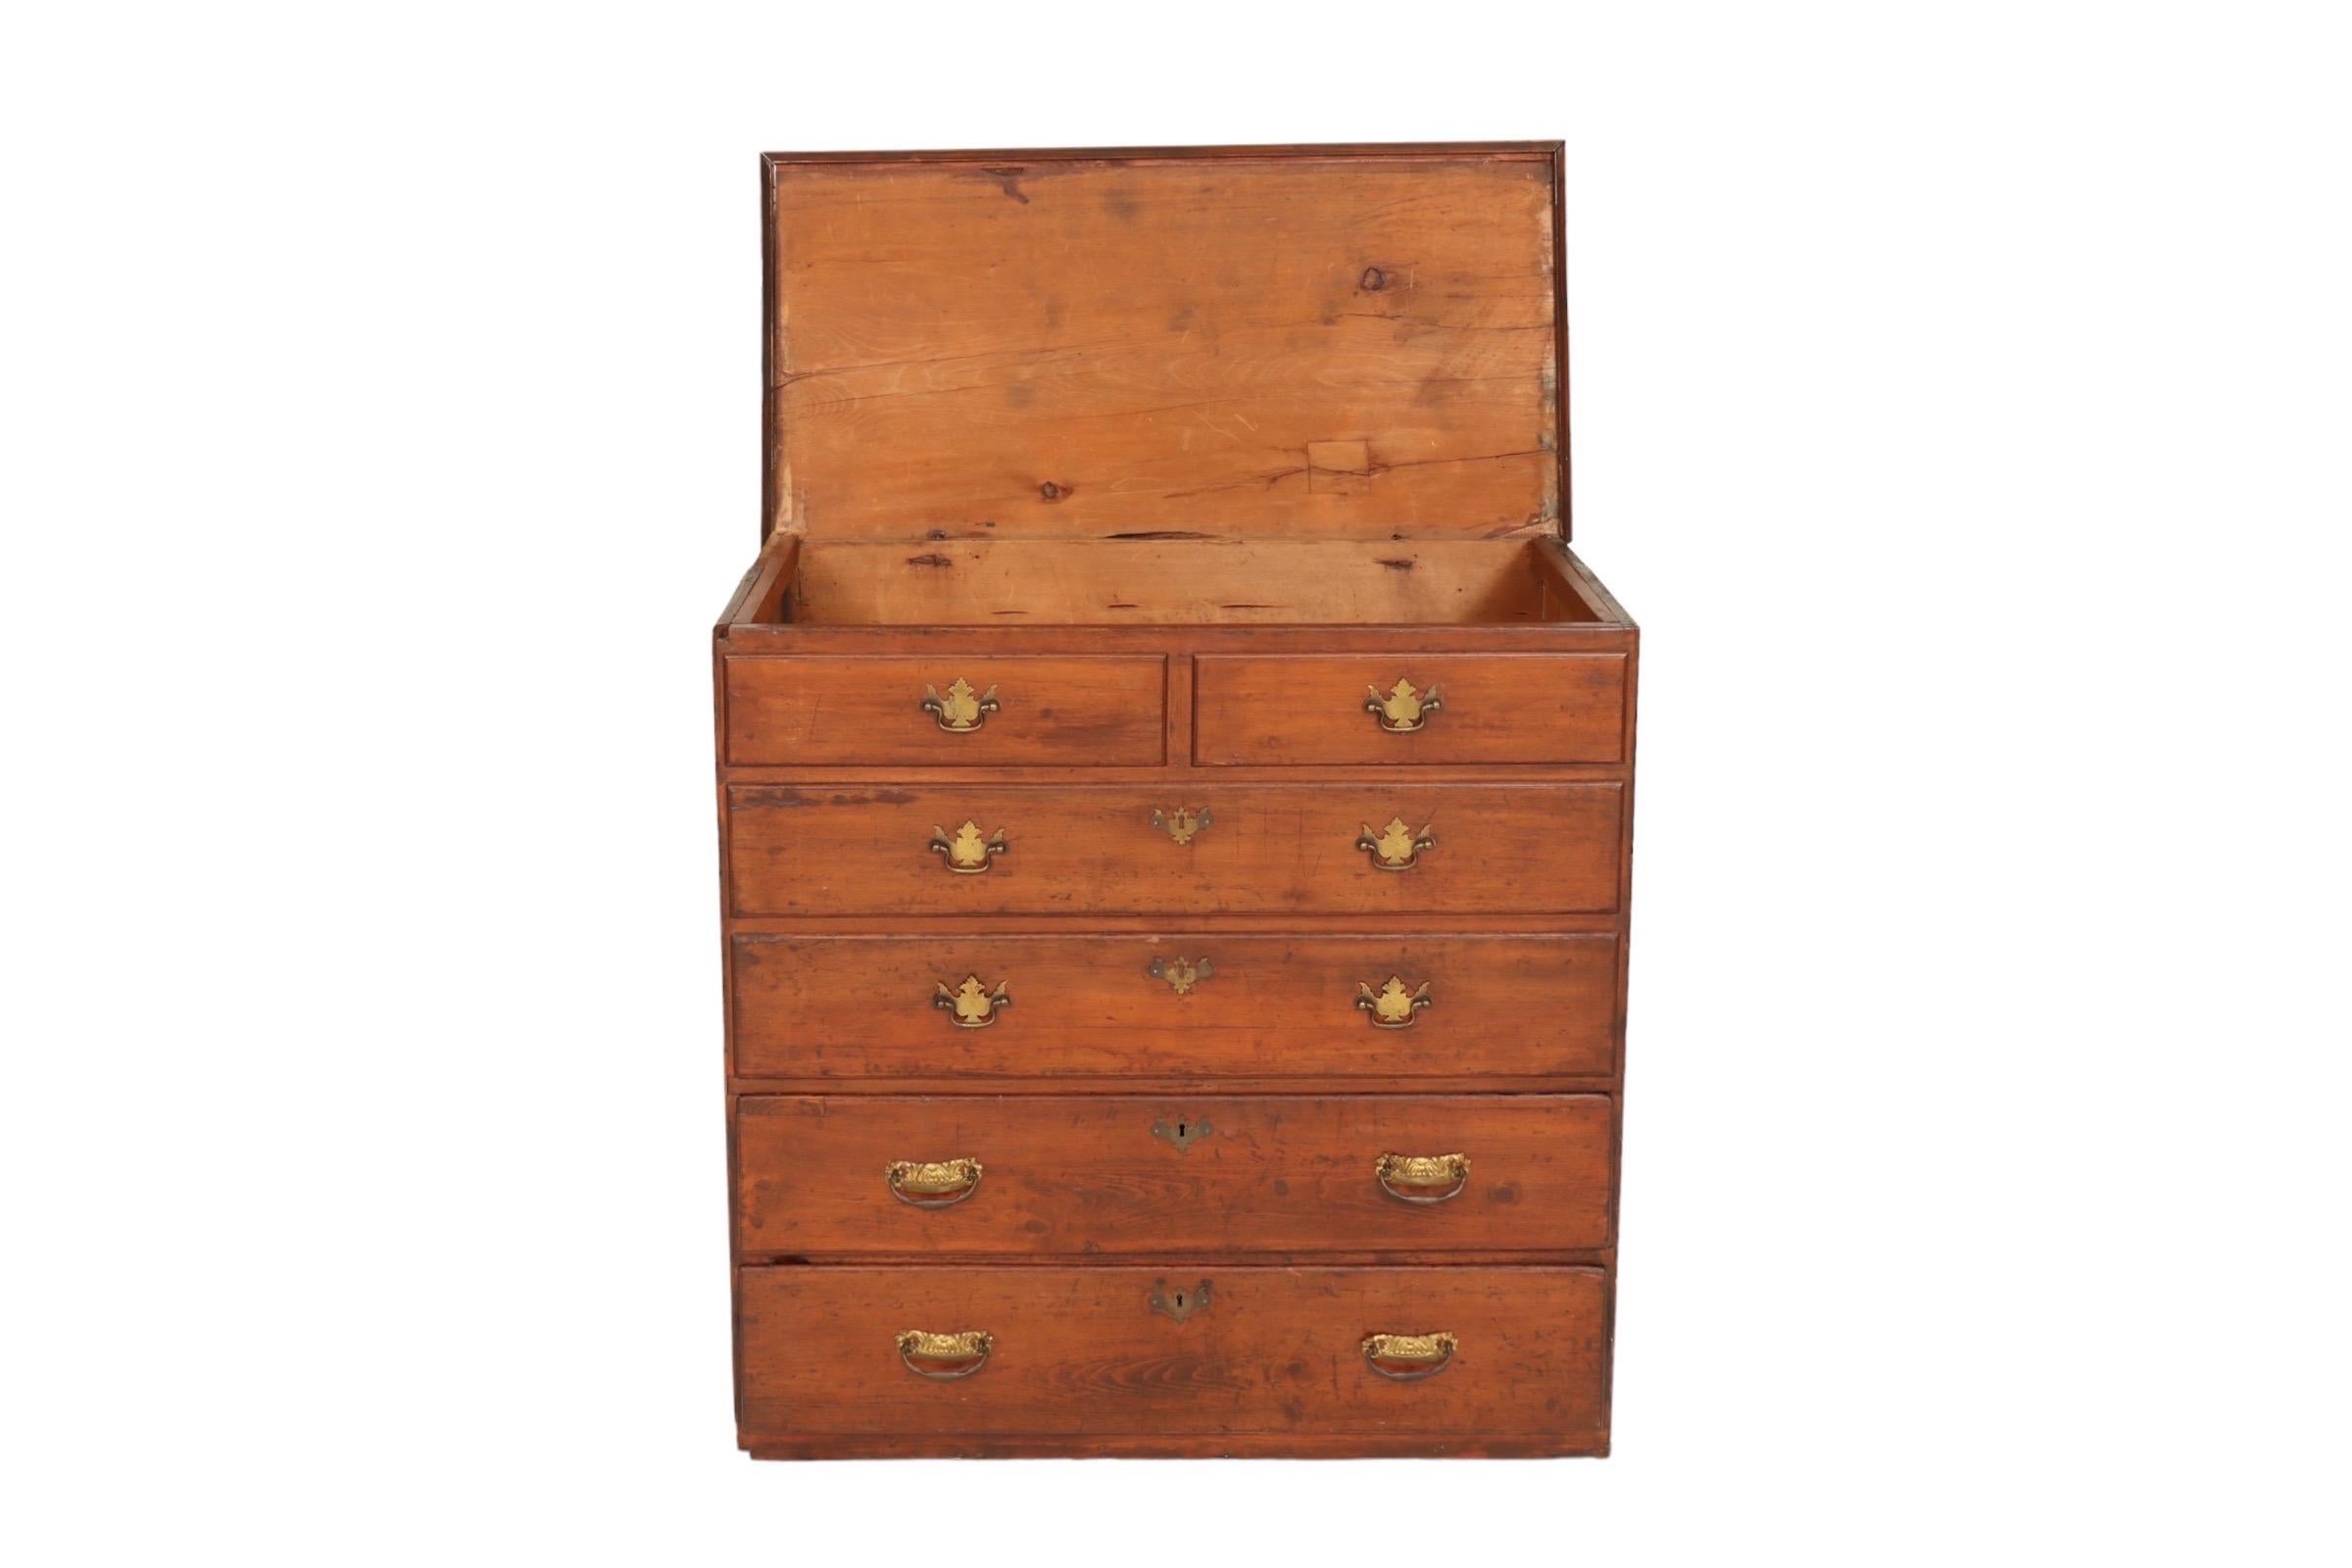 An antique pine blanket chest dated 1763 on the back. The rectangular top with beveled trim opens to reveal a deep storage compartment. The face has two small sham drawers over two long sham drawers, with two functional dovetailed drawers below, all